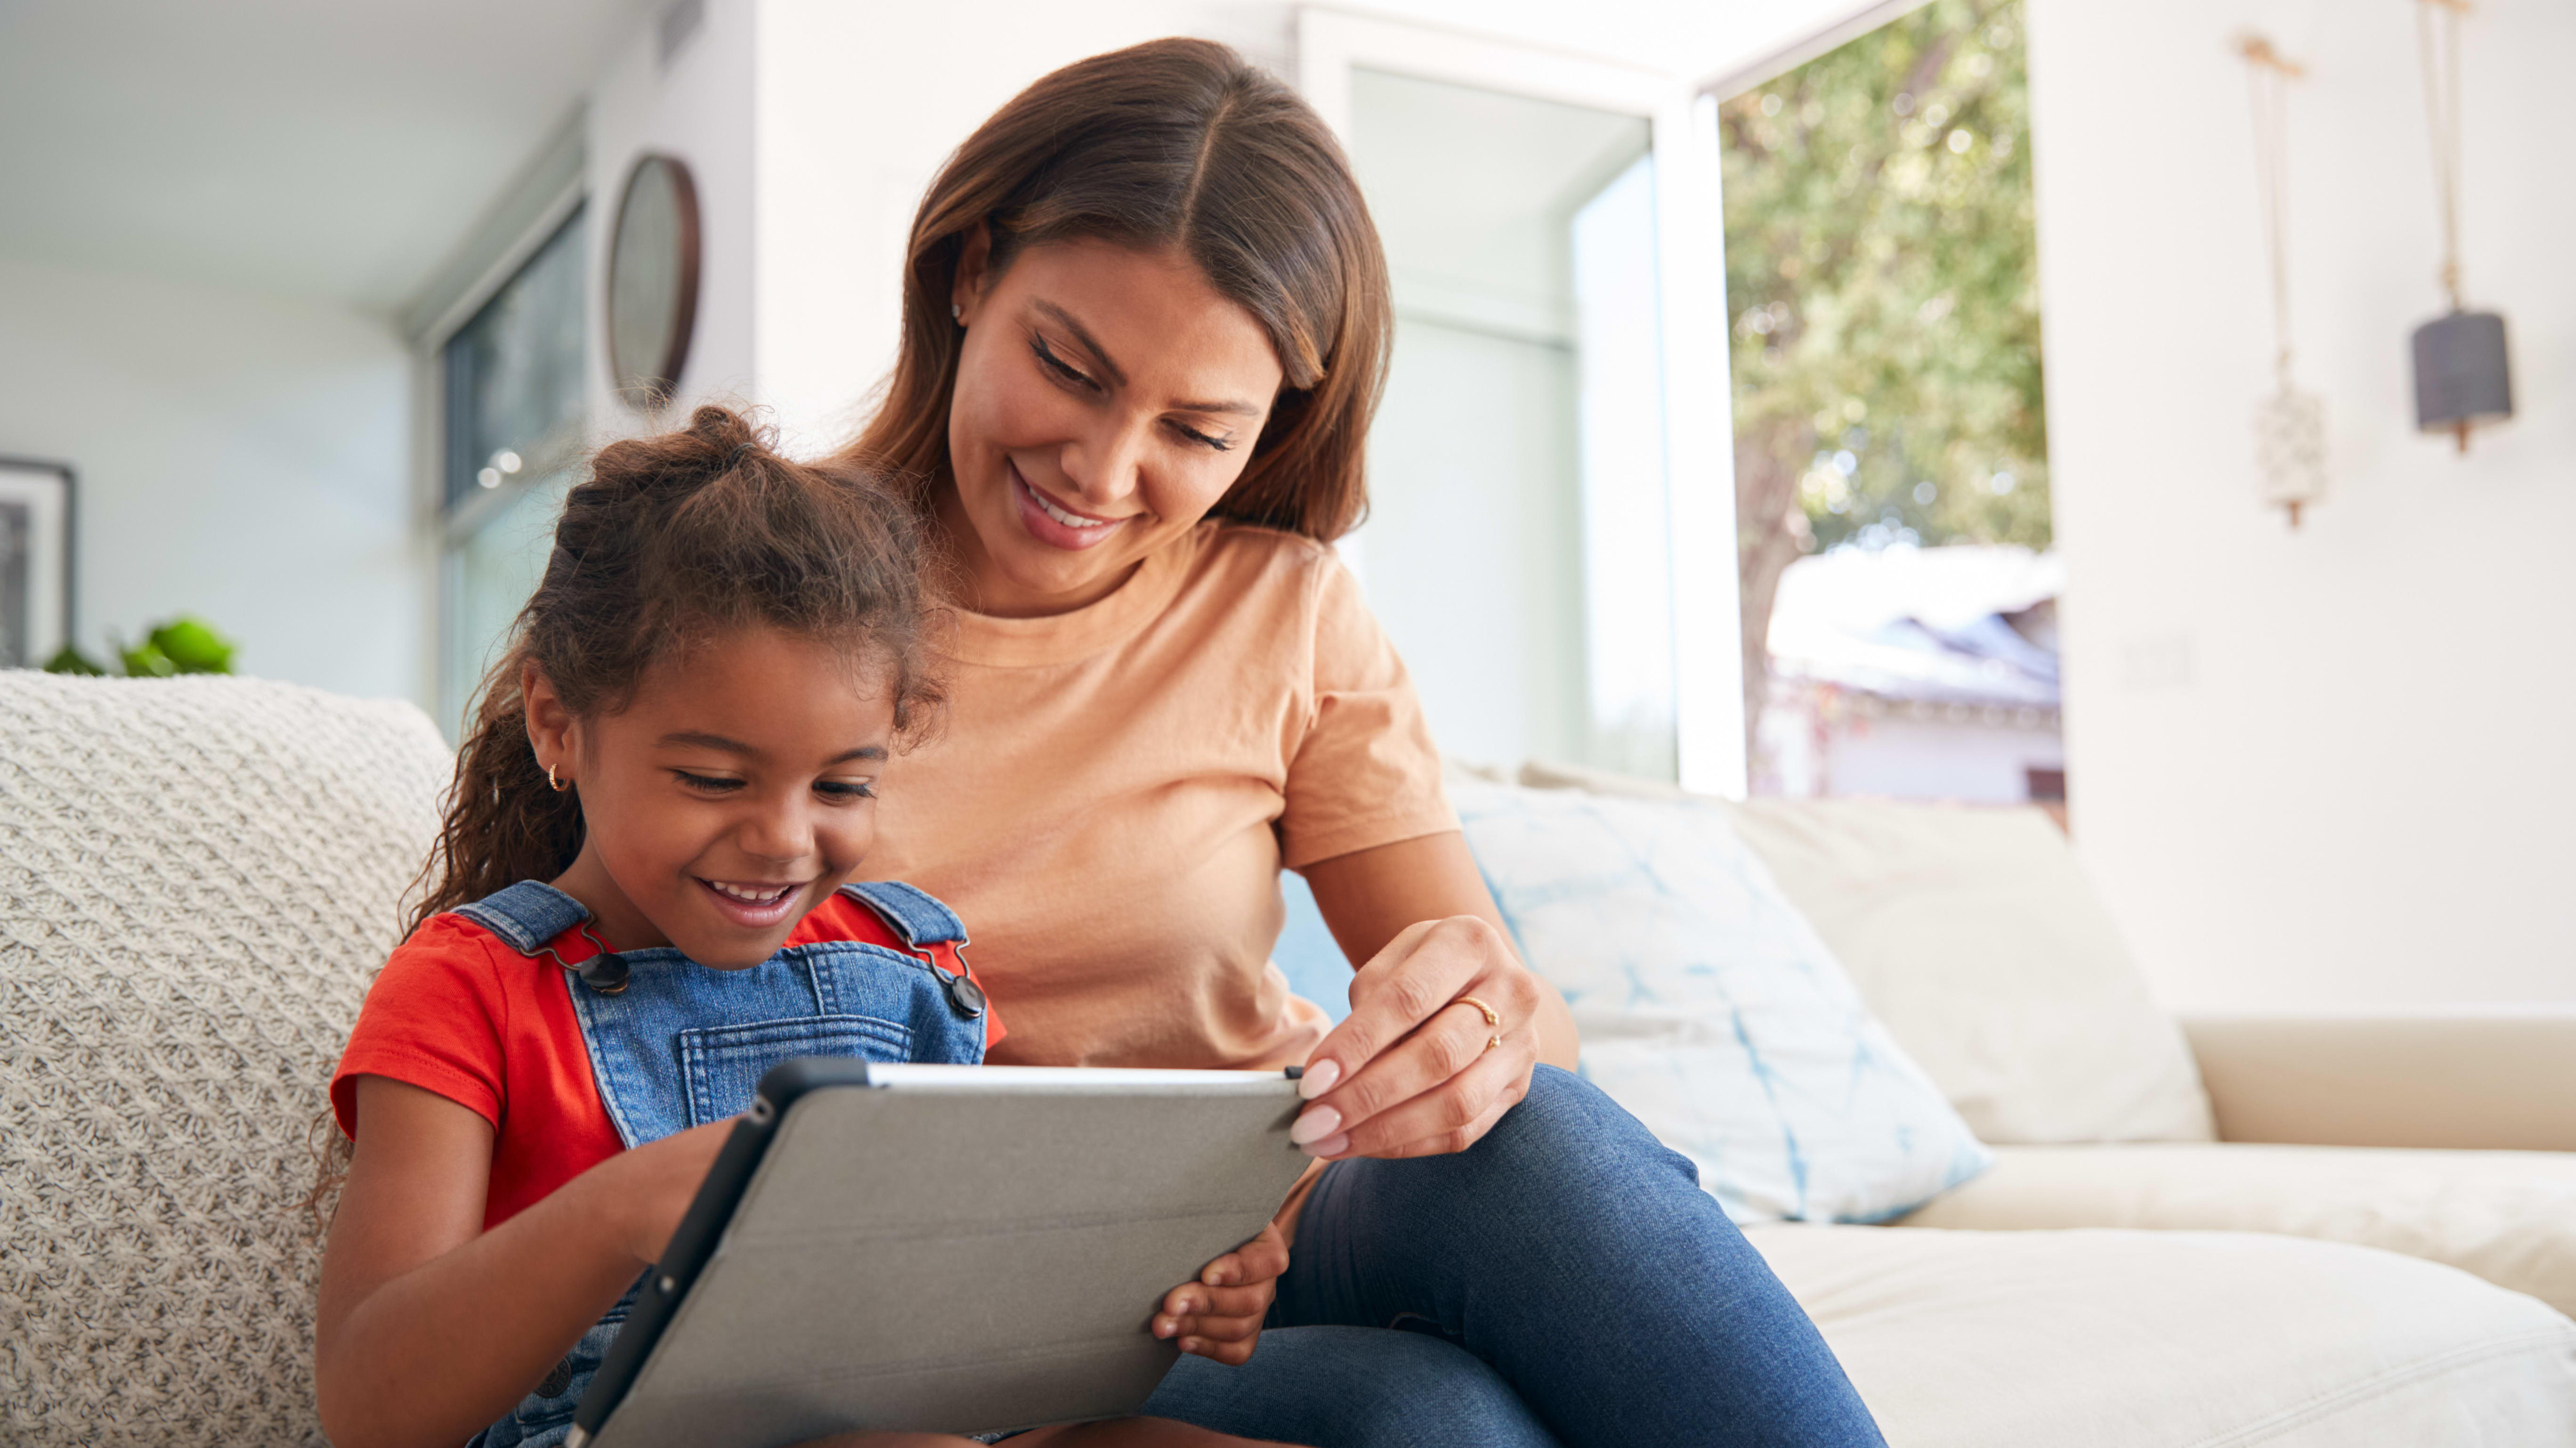 Acorns Launches Acorns Early To Give Every Child Financial Access